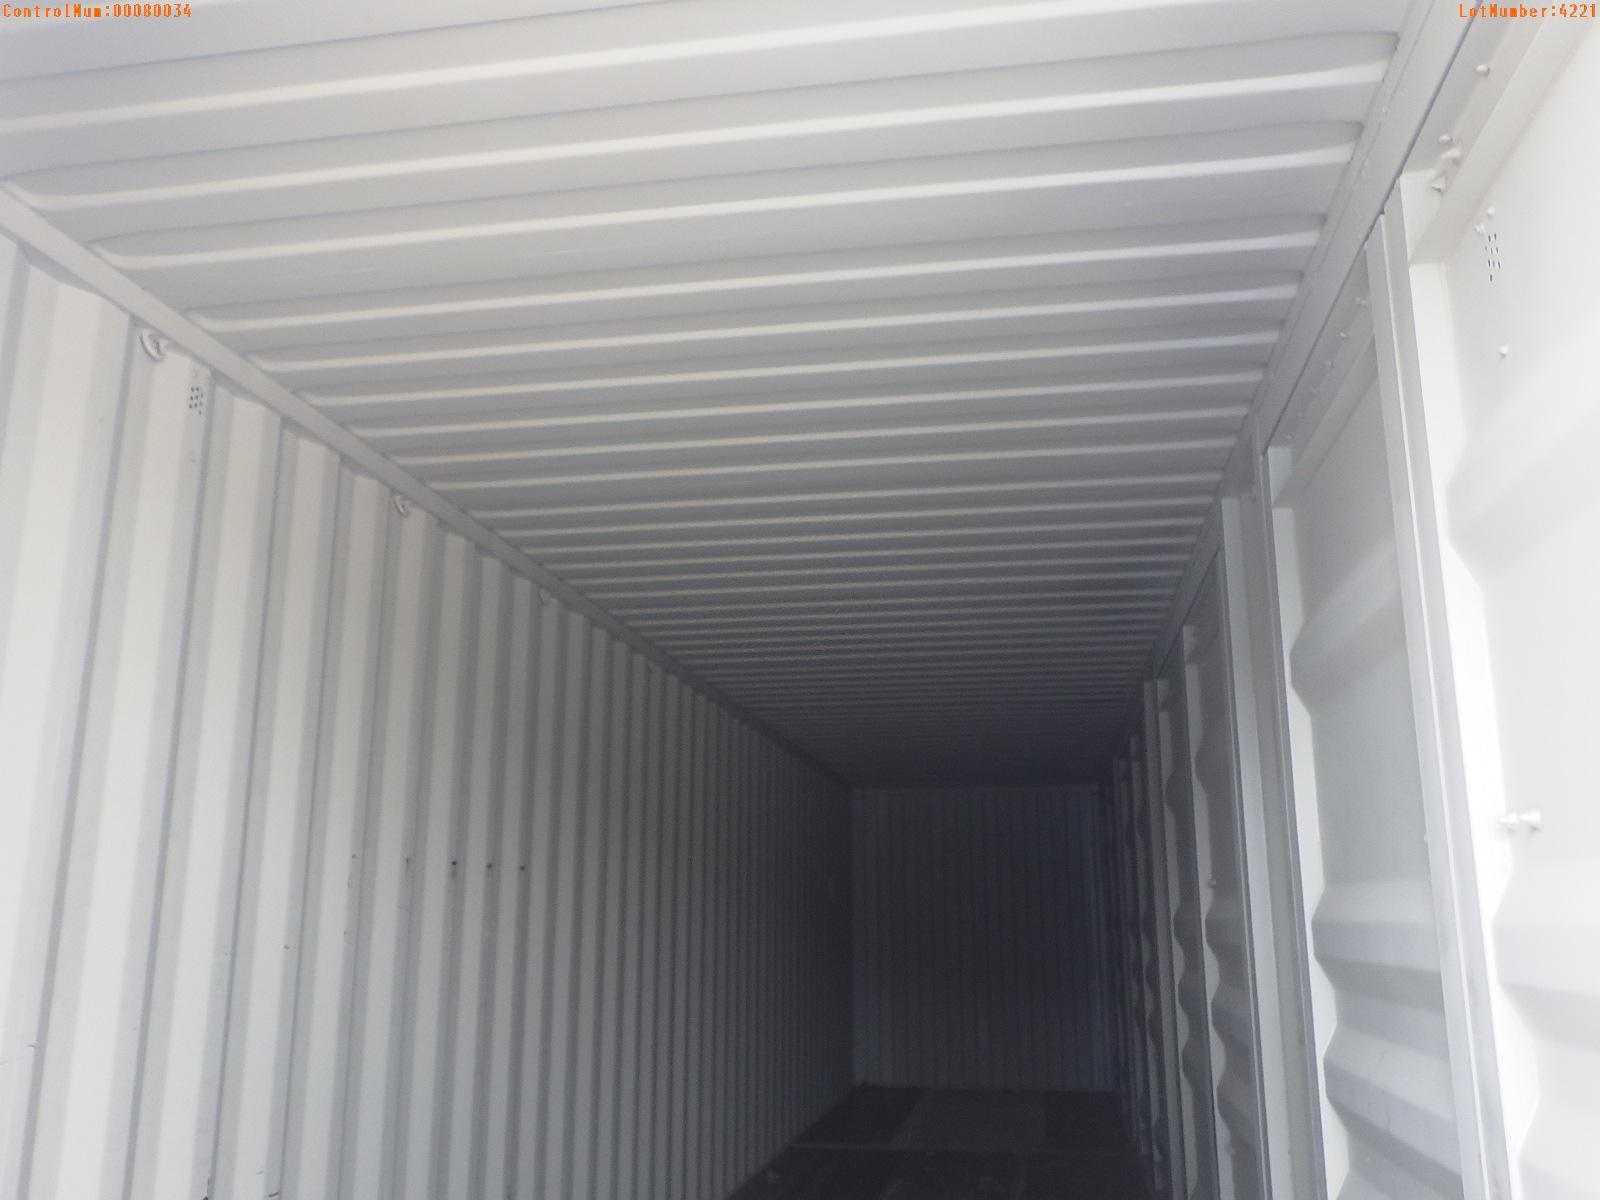 5-04221 (Equip.-Container)  Seller:Private/Dealer 40 FOOT METAL SHIPPING CONTAIN